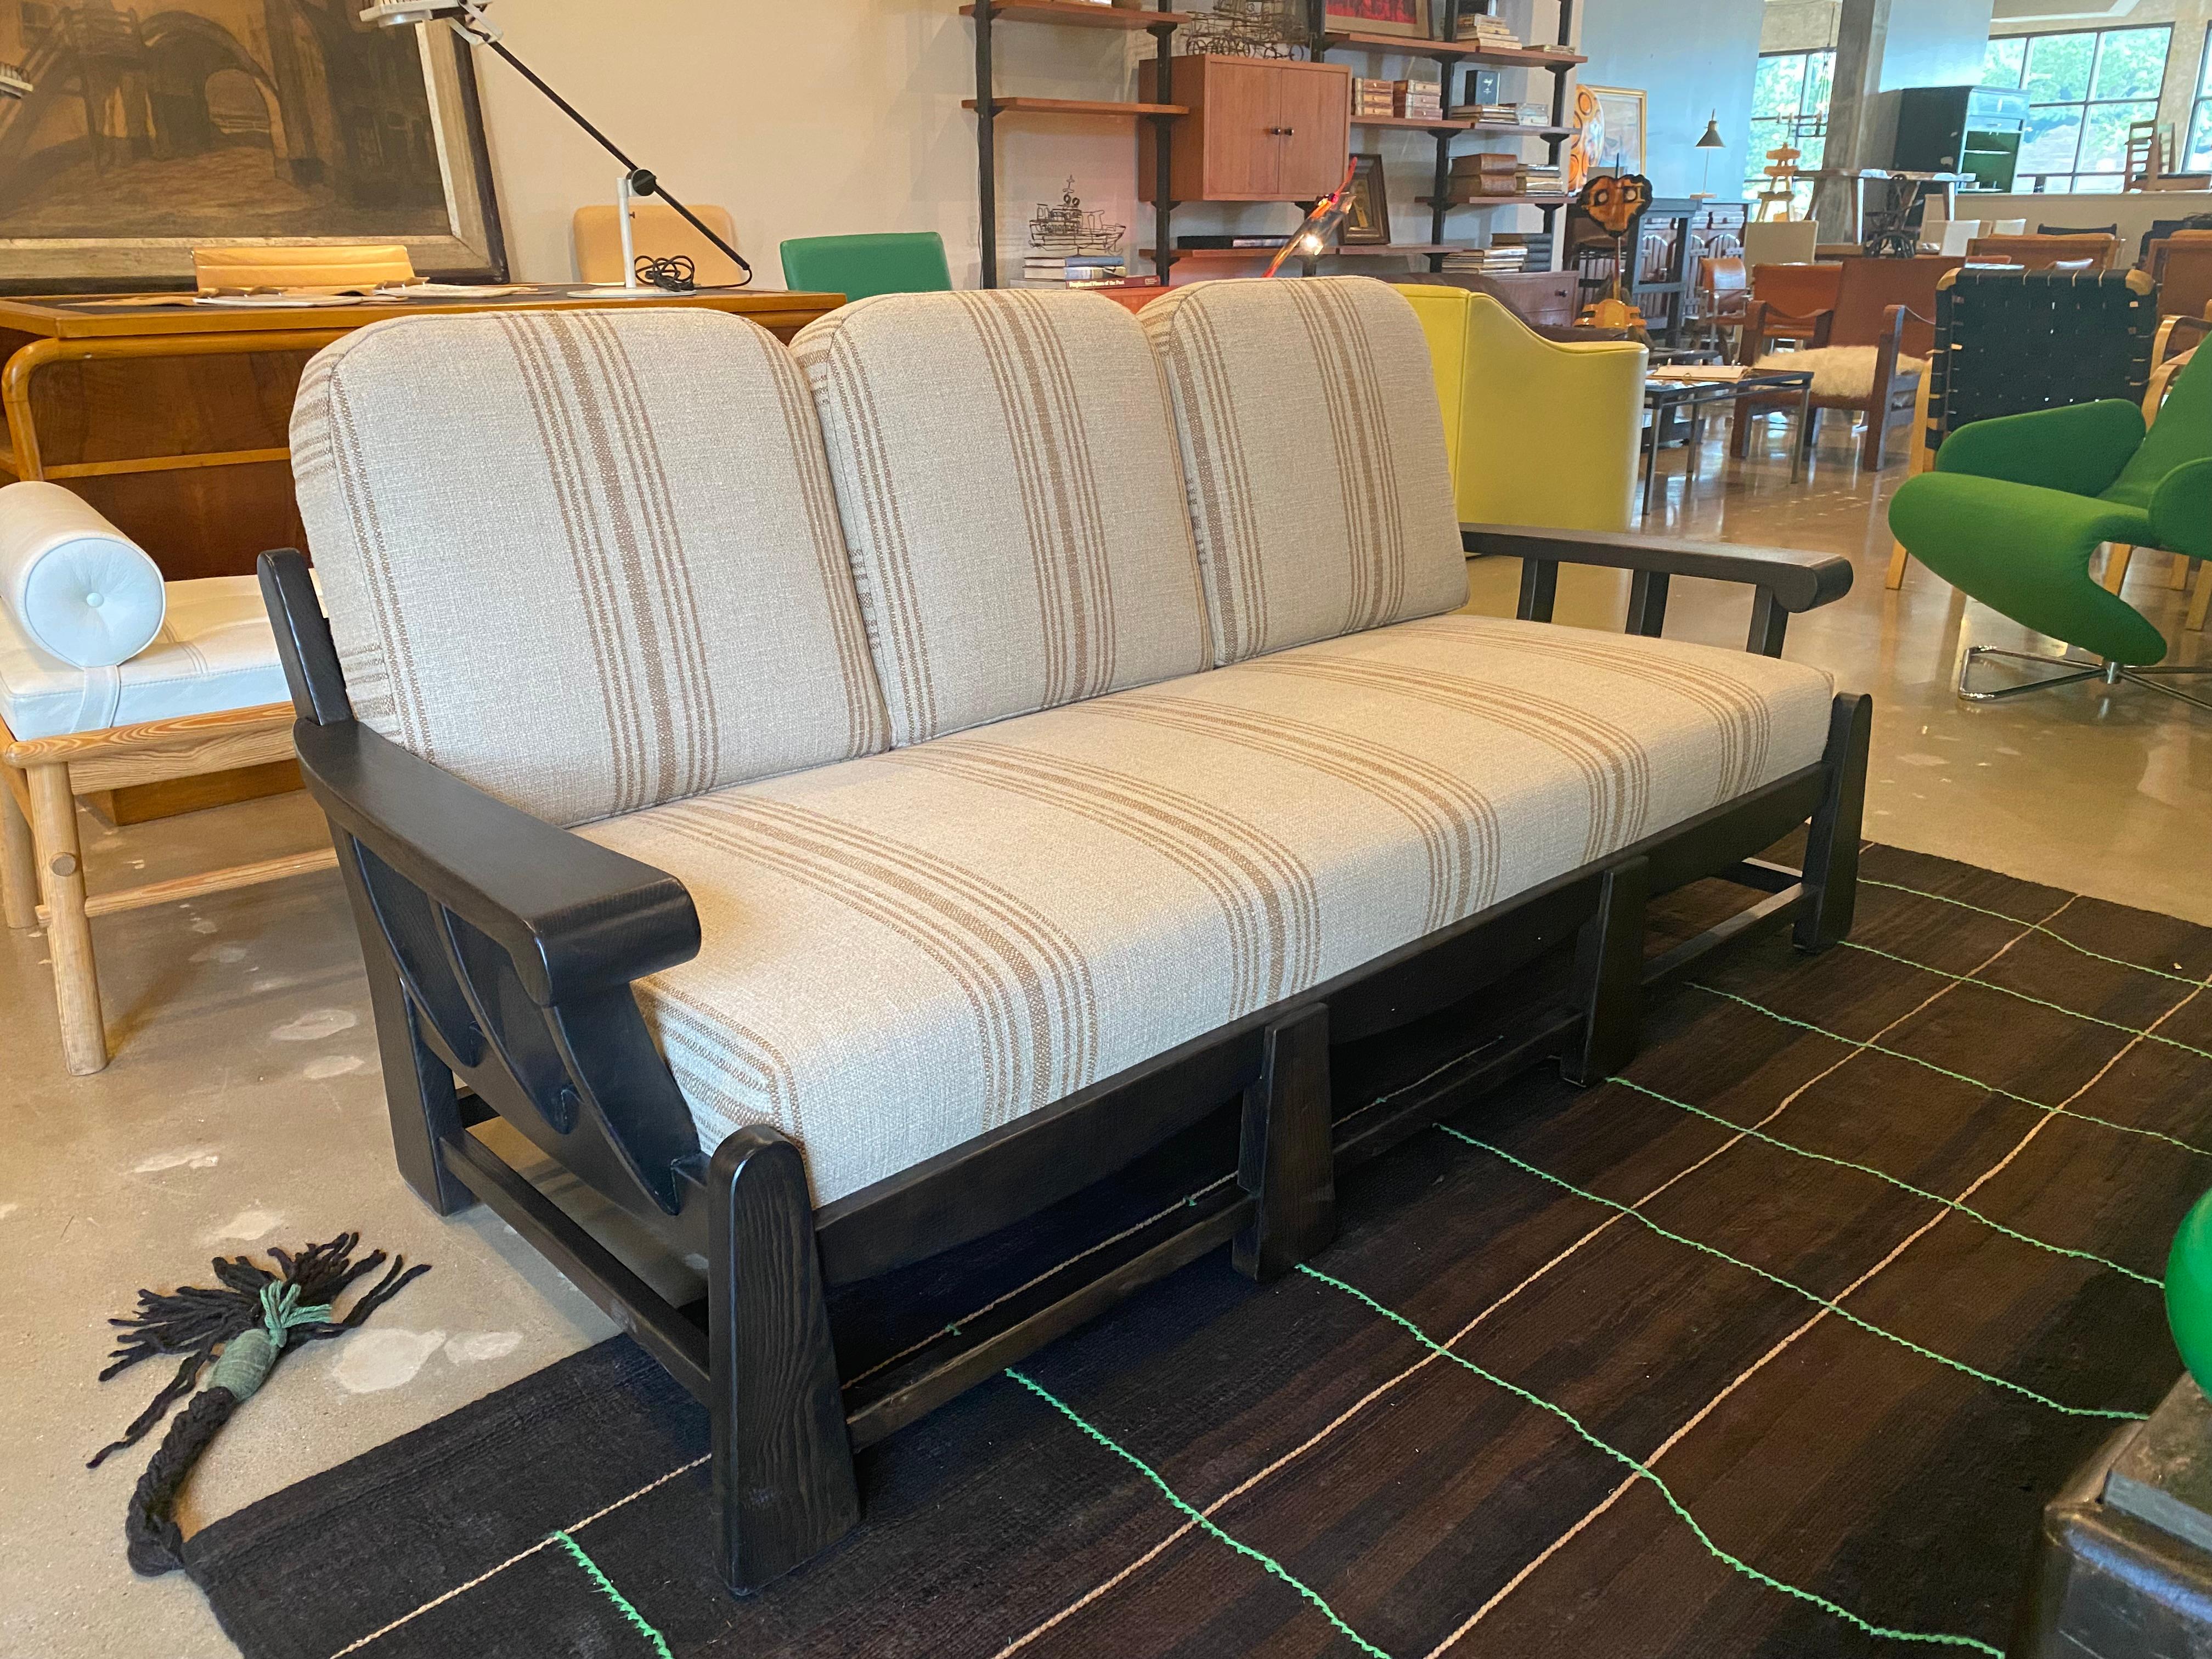 Sculptural ash (looks just like oak) sofa newly refinished in fine ebony stain by professional restorer. All new cushions and upholstery in striped Belgian linen. Comfortable and as good looking from the back as it is from the front in the distinct